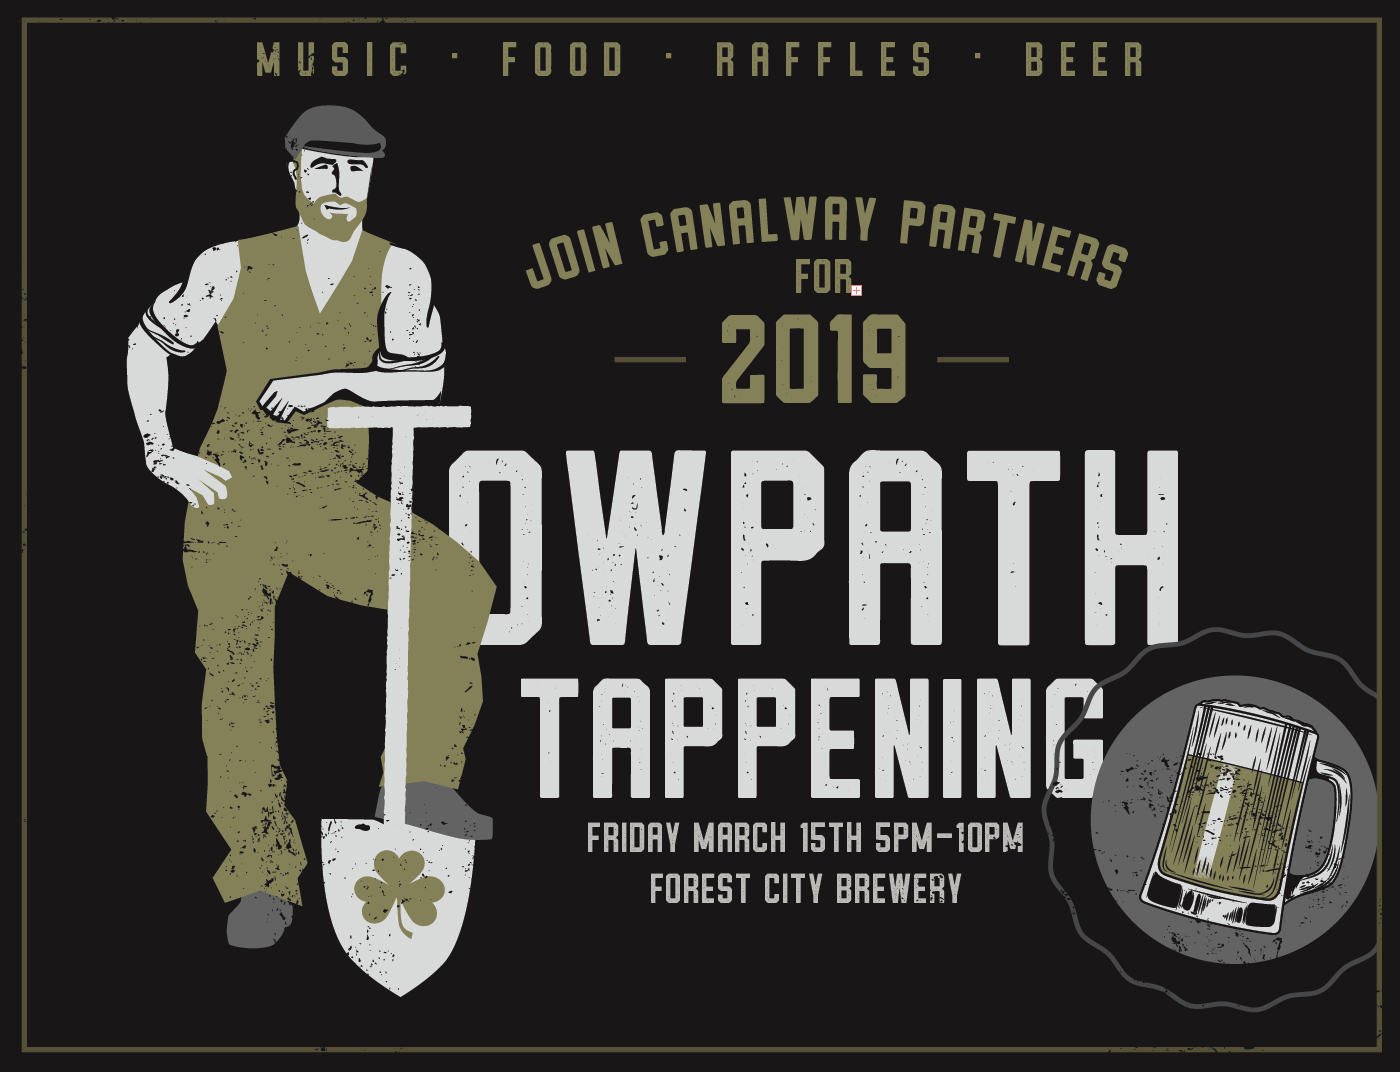 Towpath Tappening Postcard Design